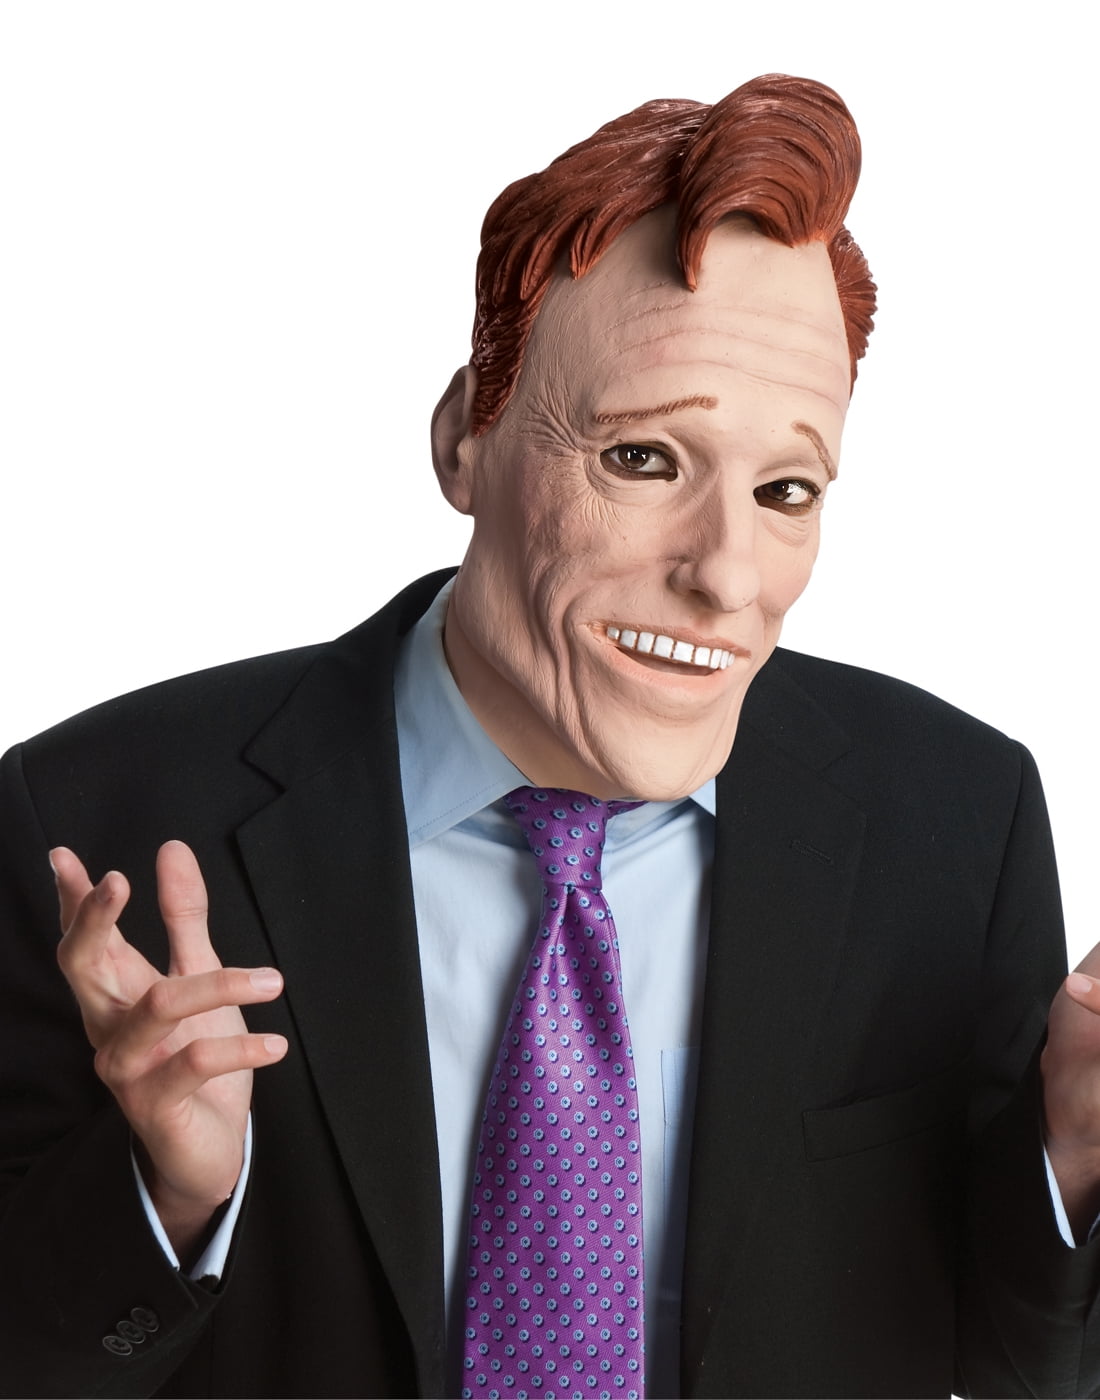 Card Face and Fancy Dress Mask Conan O'Brien Celebrity Mask 